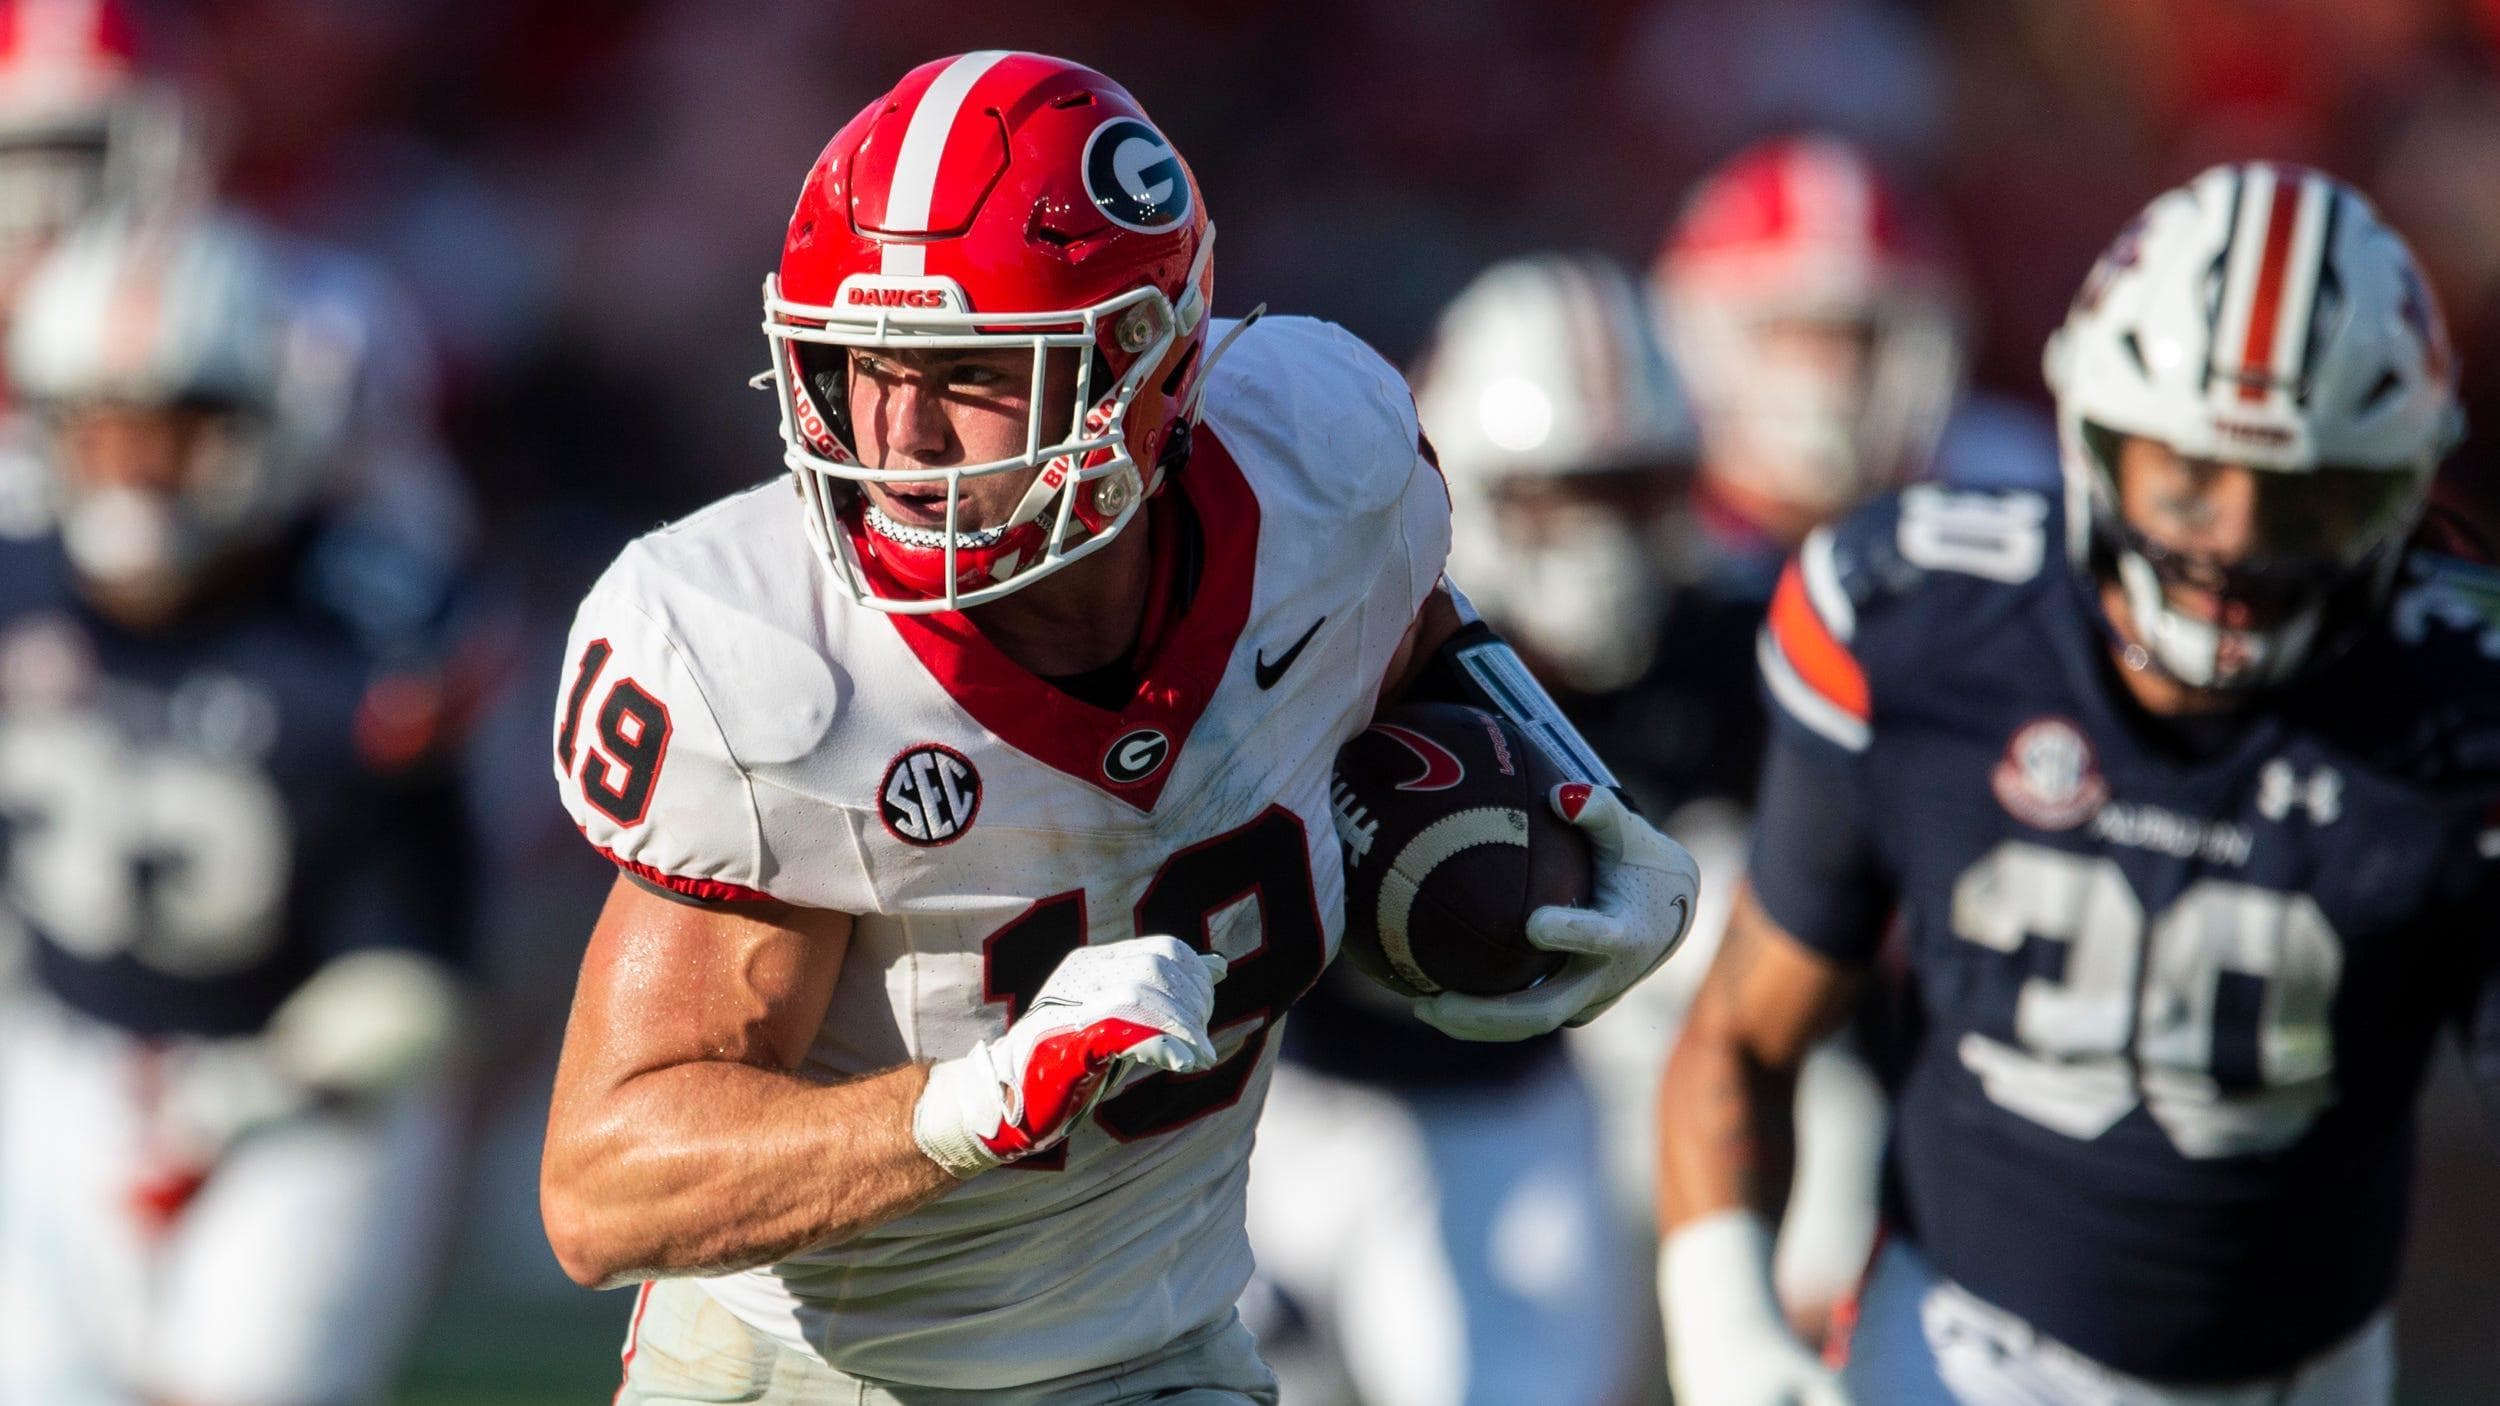 Georgia Bulldogs tight end Brock Bowers (19) runs after a catch during the third quarter.